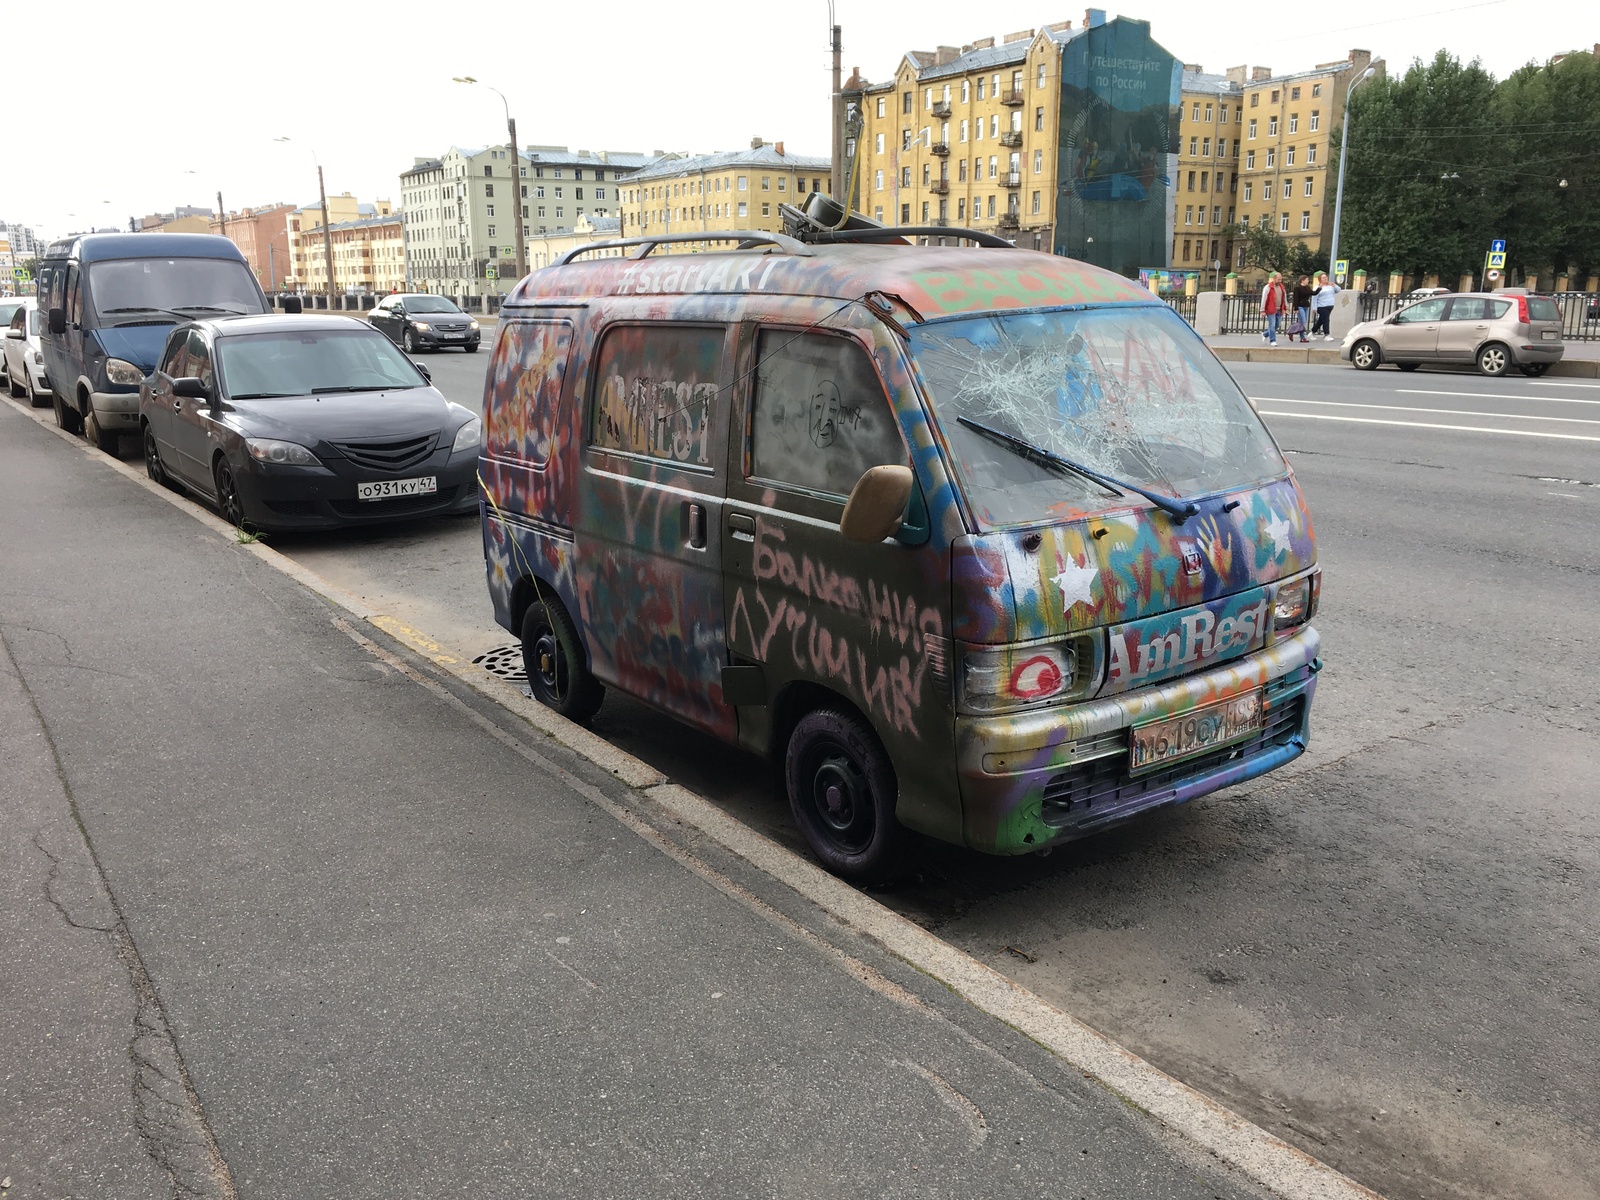 Selling cheap. Not beat. Not painted. One owner. - My, Auto, The photo, Graffiti, Saint Petersburg, The street, 